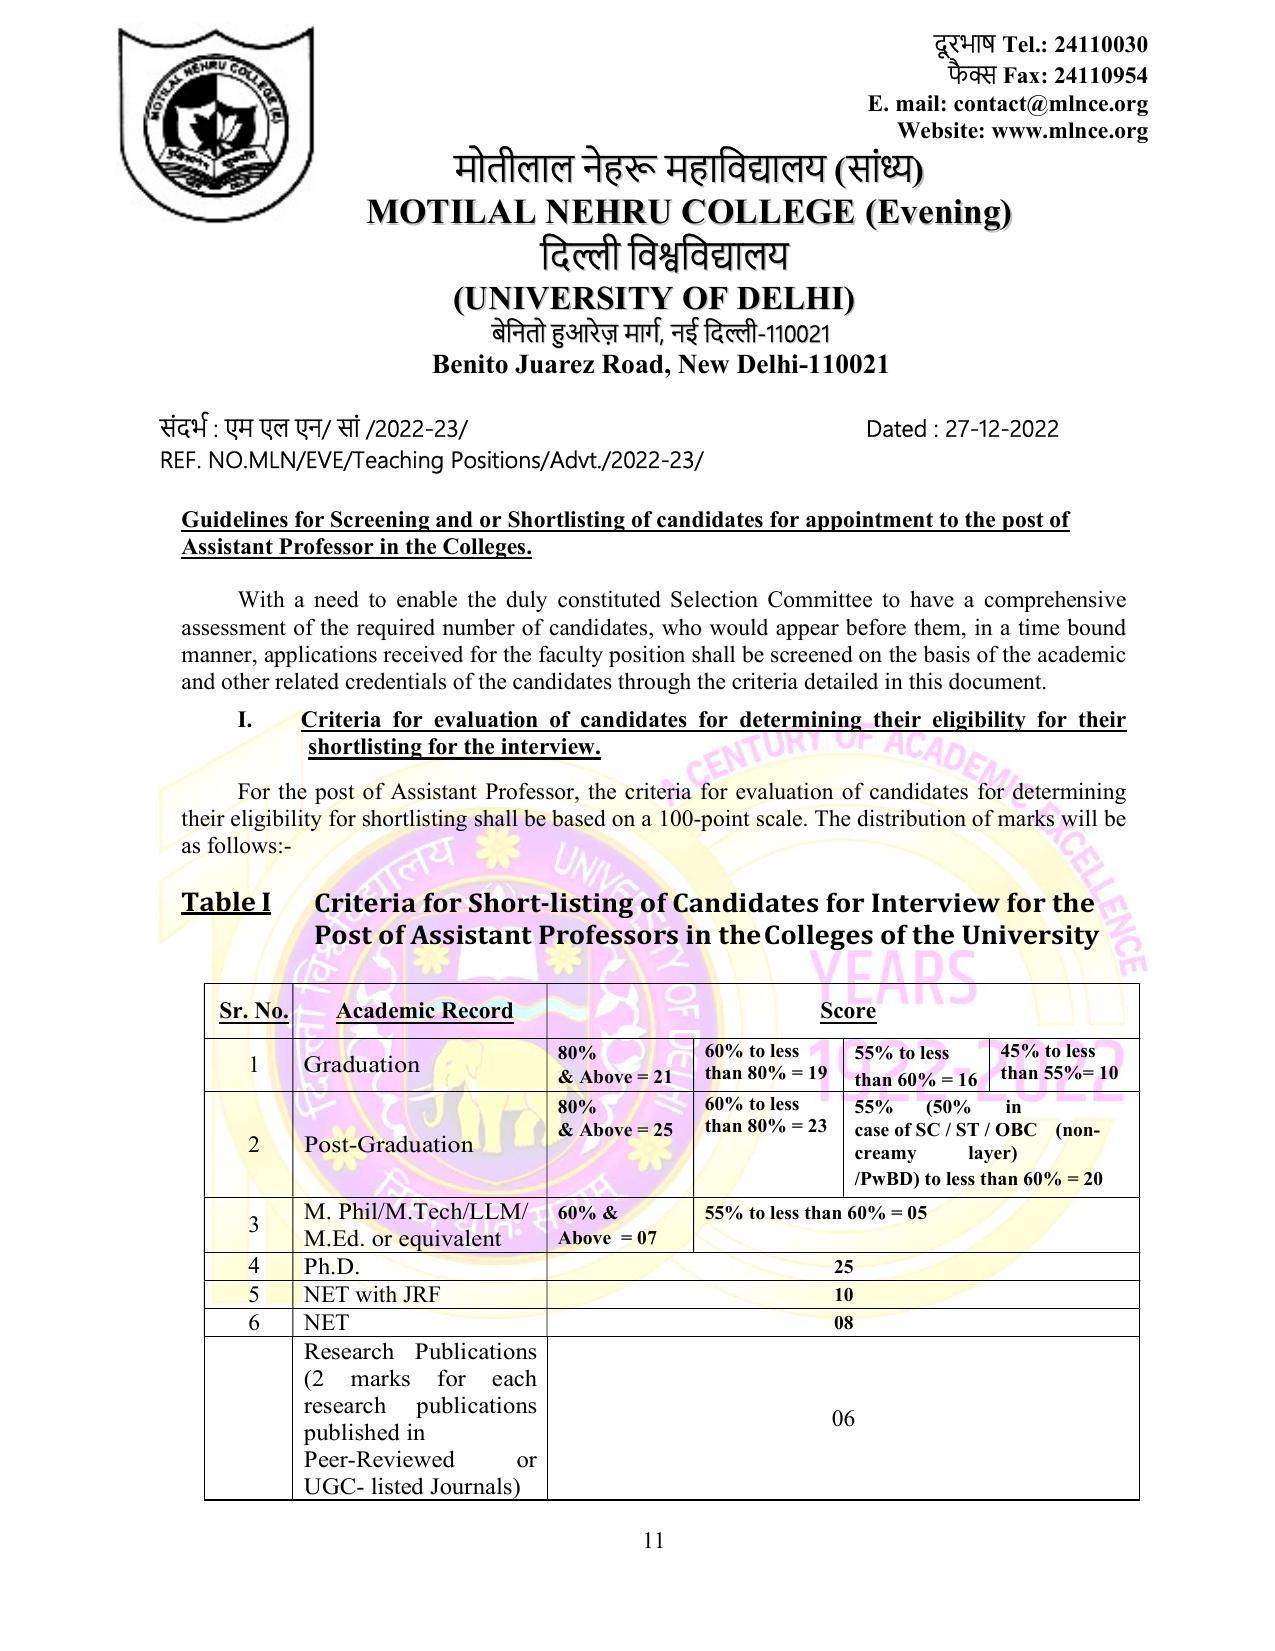 Motilal Nehru College (Evening) Invites Application for 75 Assistant Professor Recruitment 2022 - Page 6